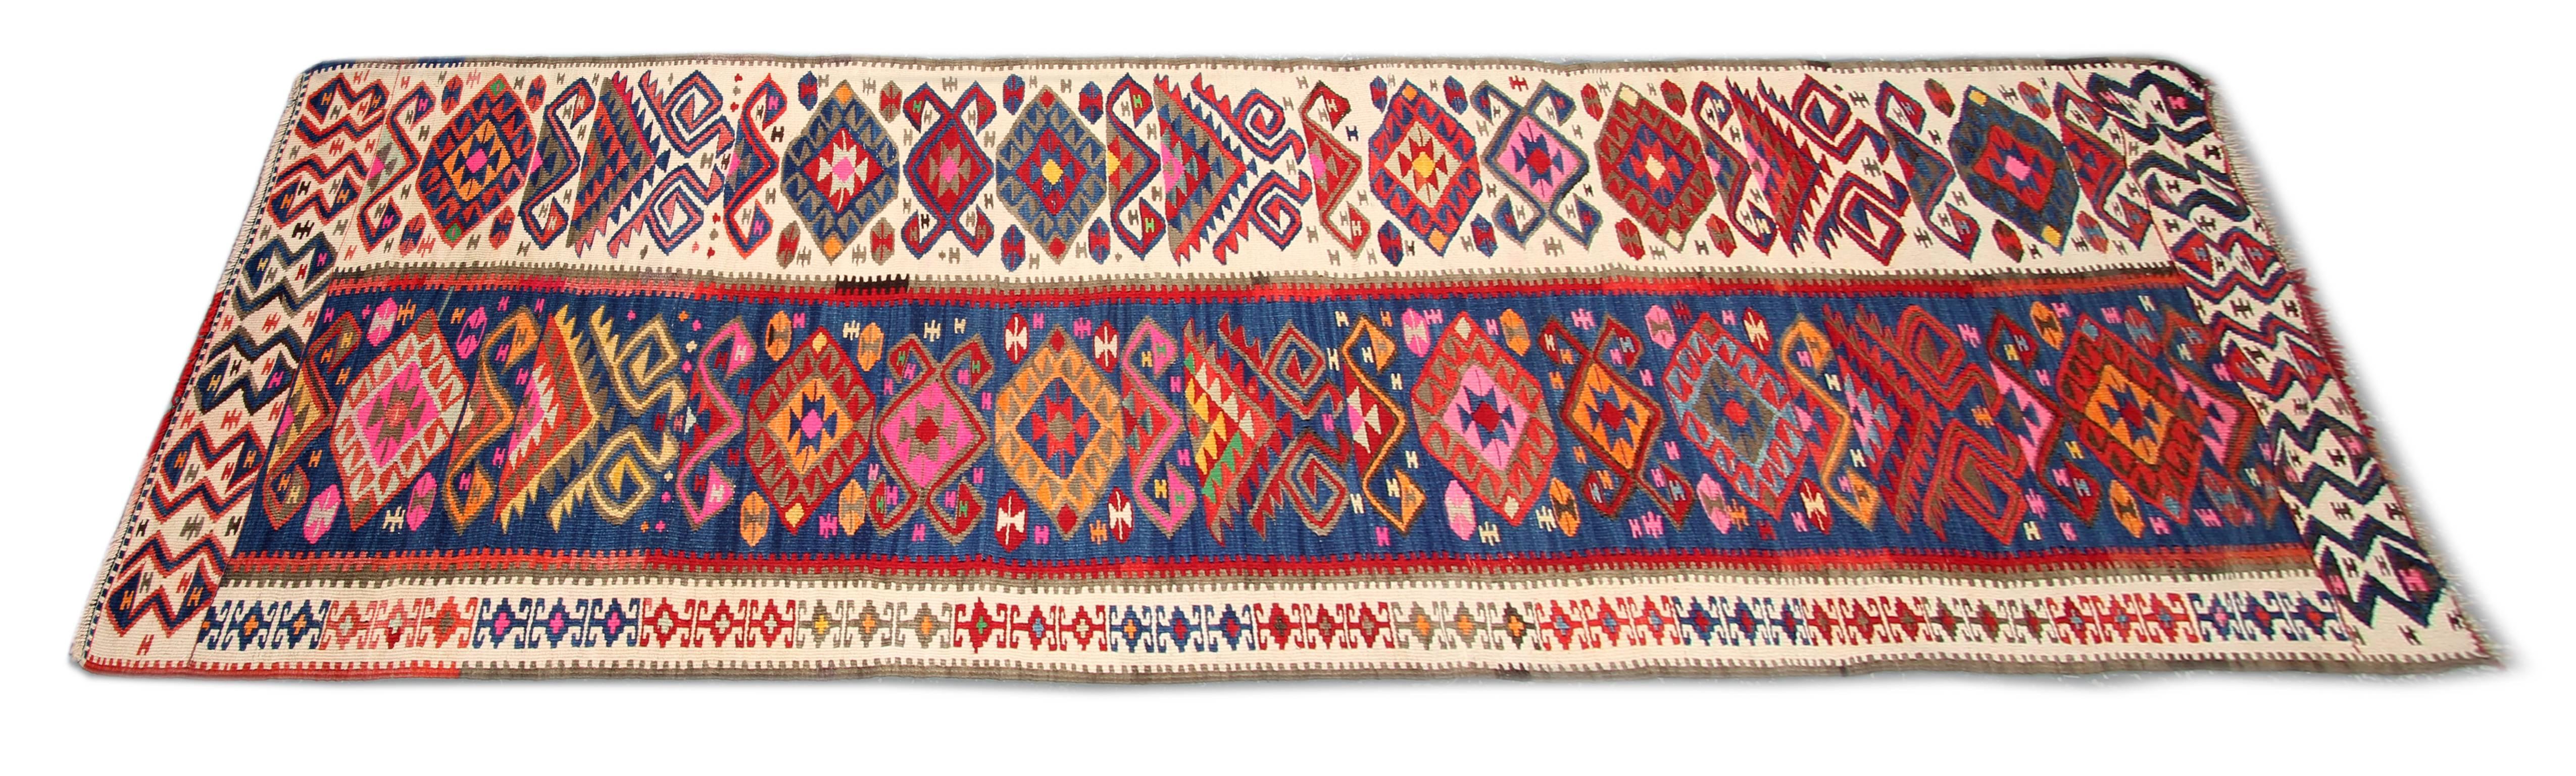 This Turkish Kilim rug is from the area which is call Aydin. Aydin's location near the Mediterranean ensures its importance as a center for trade. Unfortunately, Aydin today is an agricultural area where weaving has ceased.